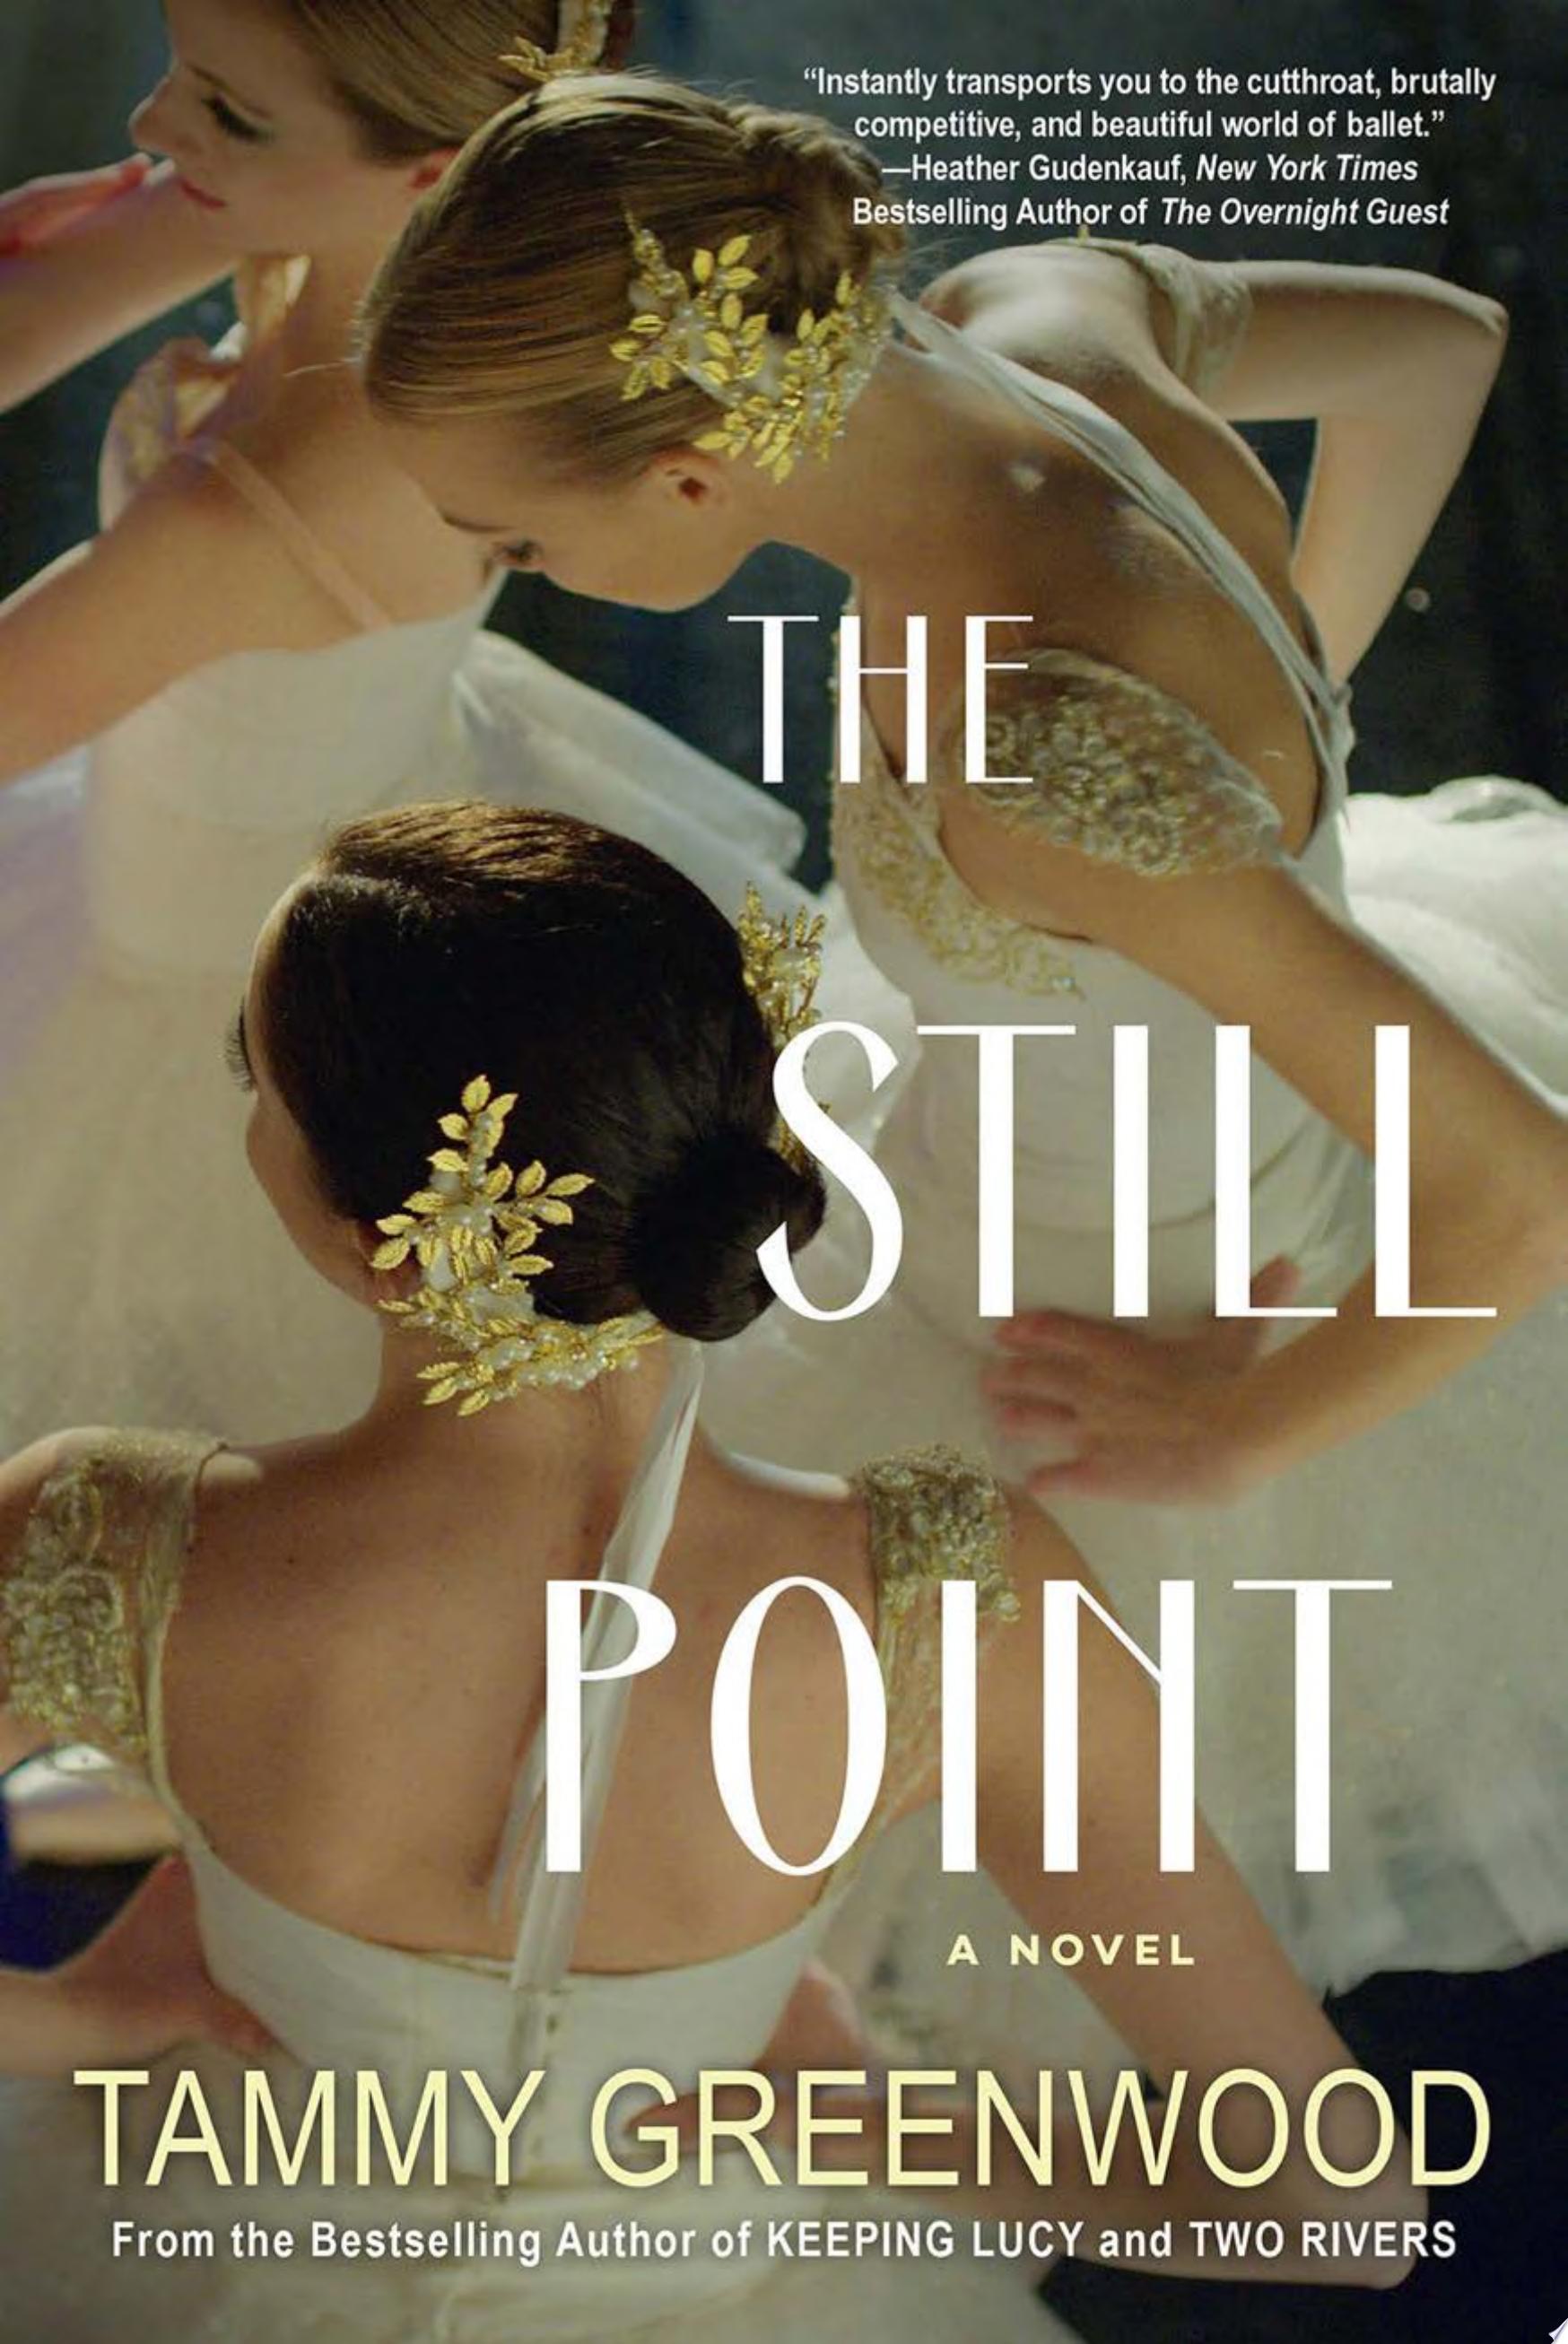 Image for "The Still Point"